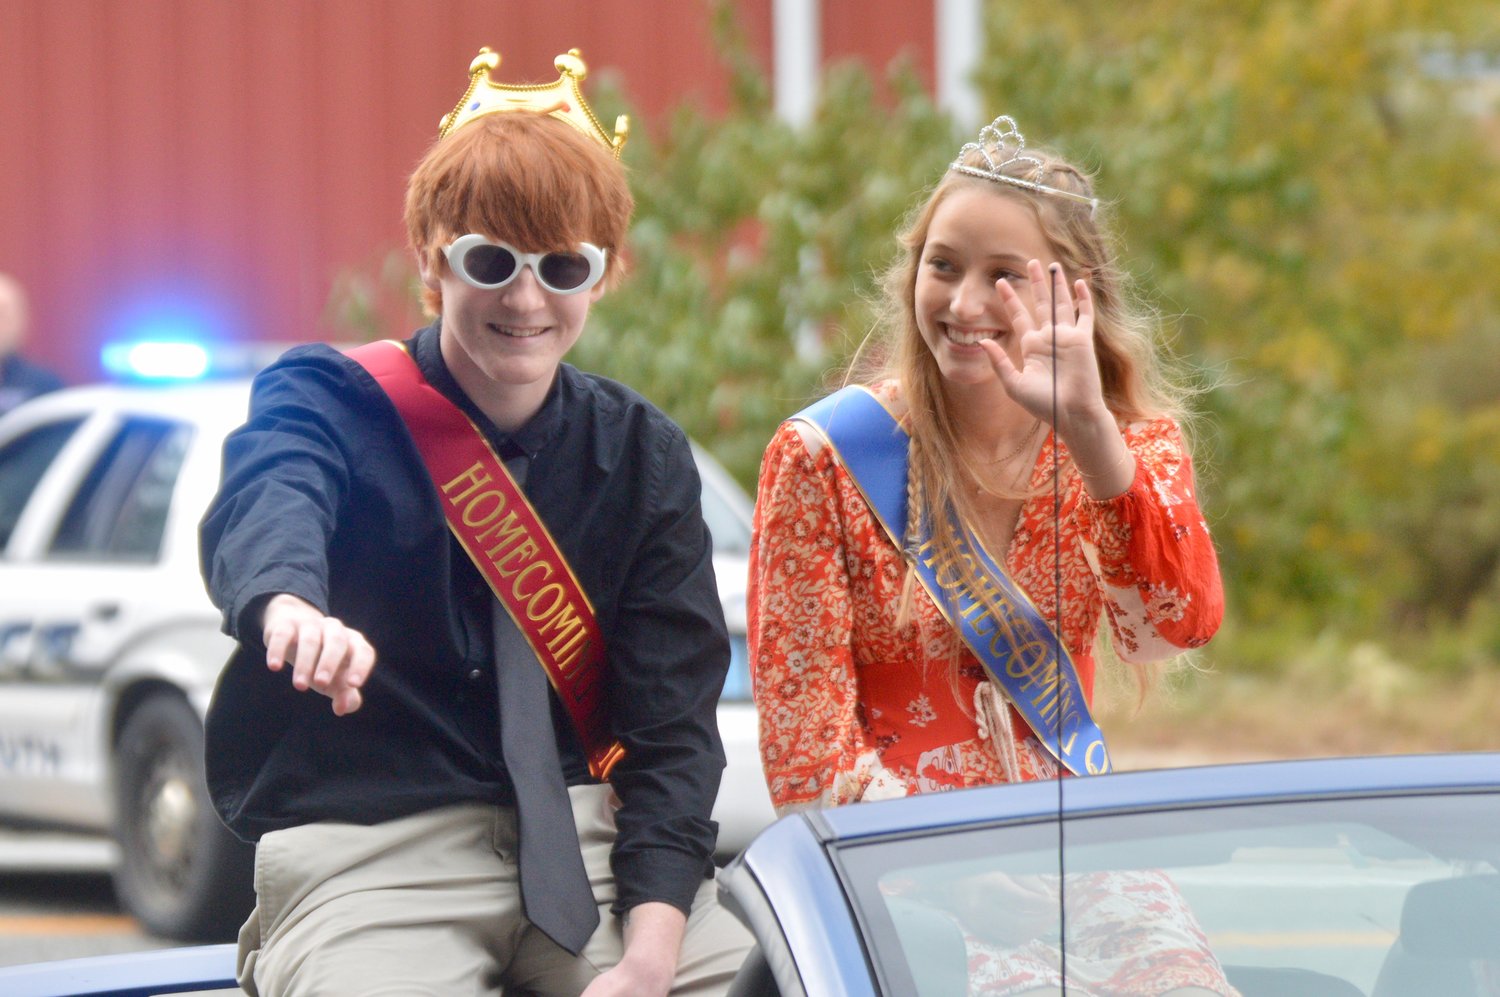 Joe Cawley and Grace Van Patten, Homecoming king and queen, greet spectators during the Homecoming parade before the game.